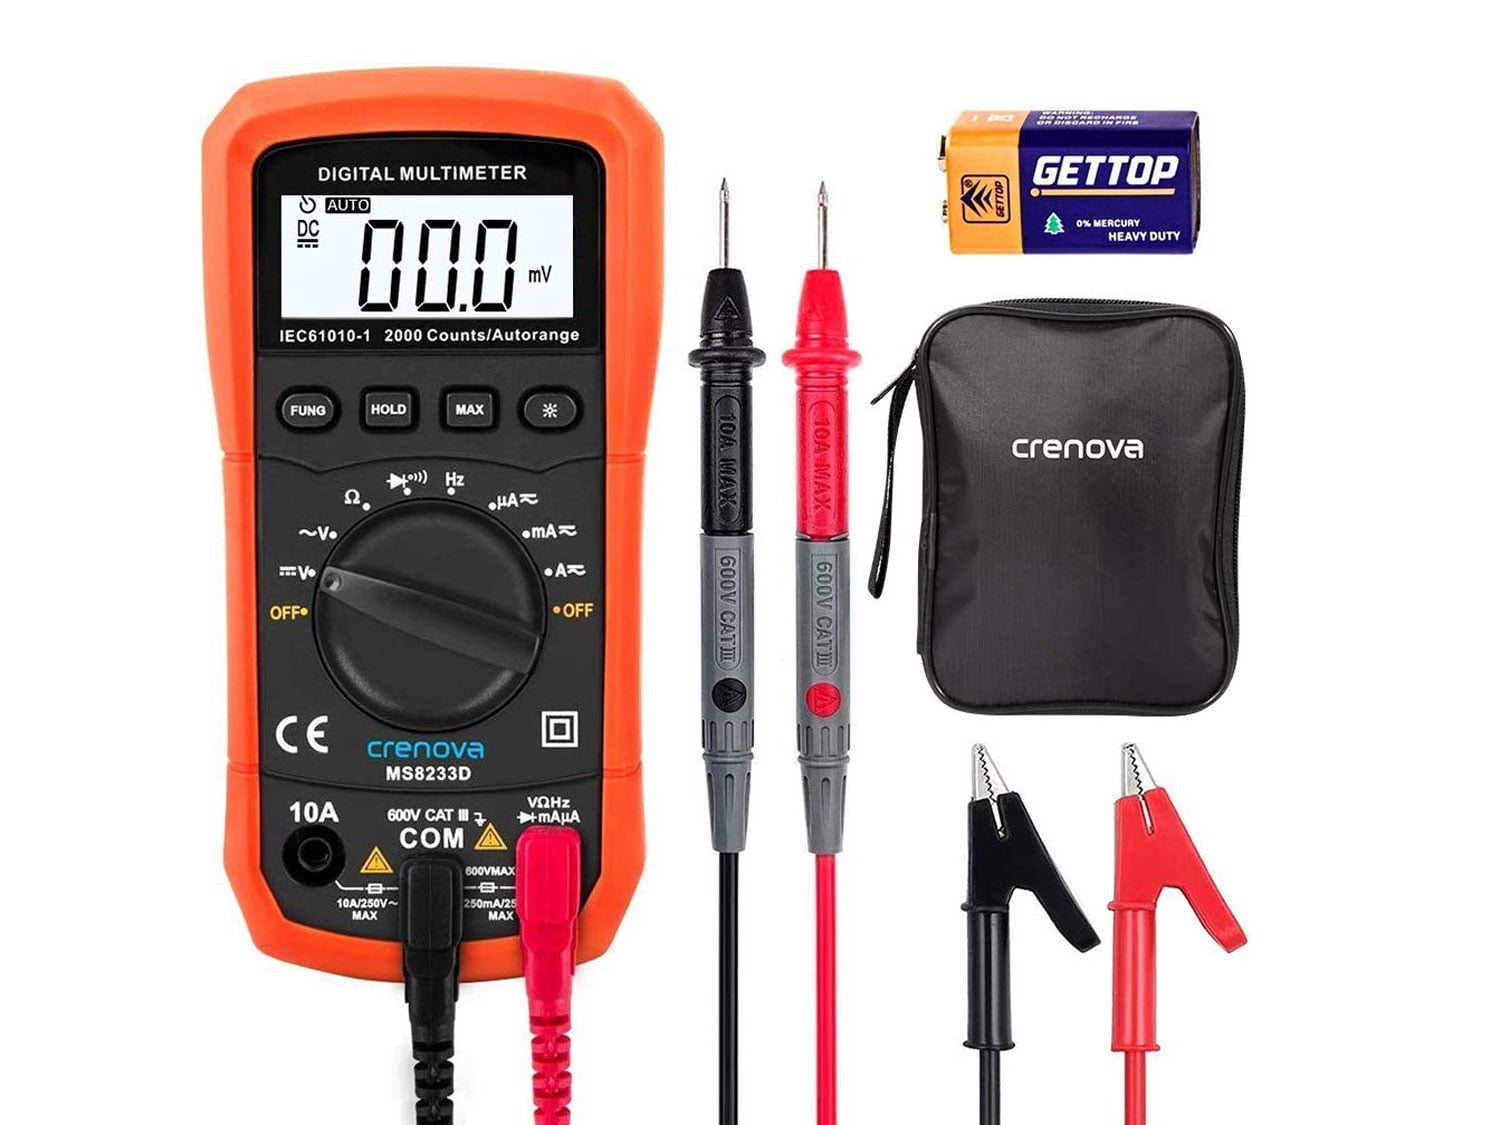 Crenova MS8233D Auto-Ranging Digital Multimeter Home Measuring Tools with Backlight LCD Display